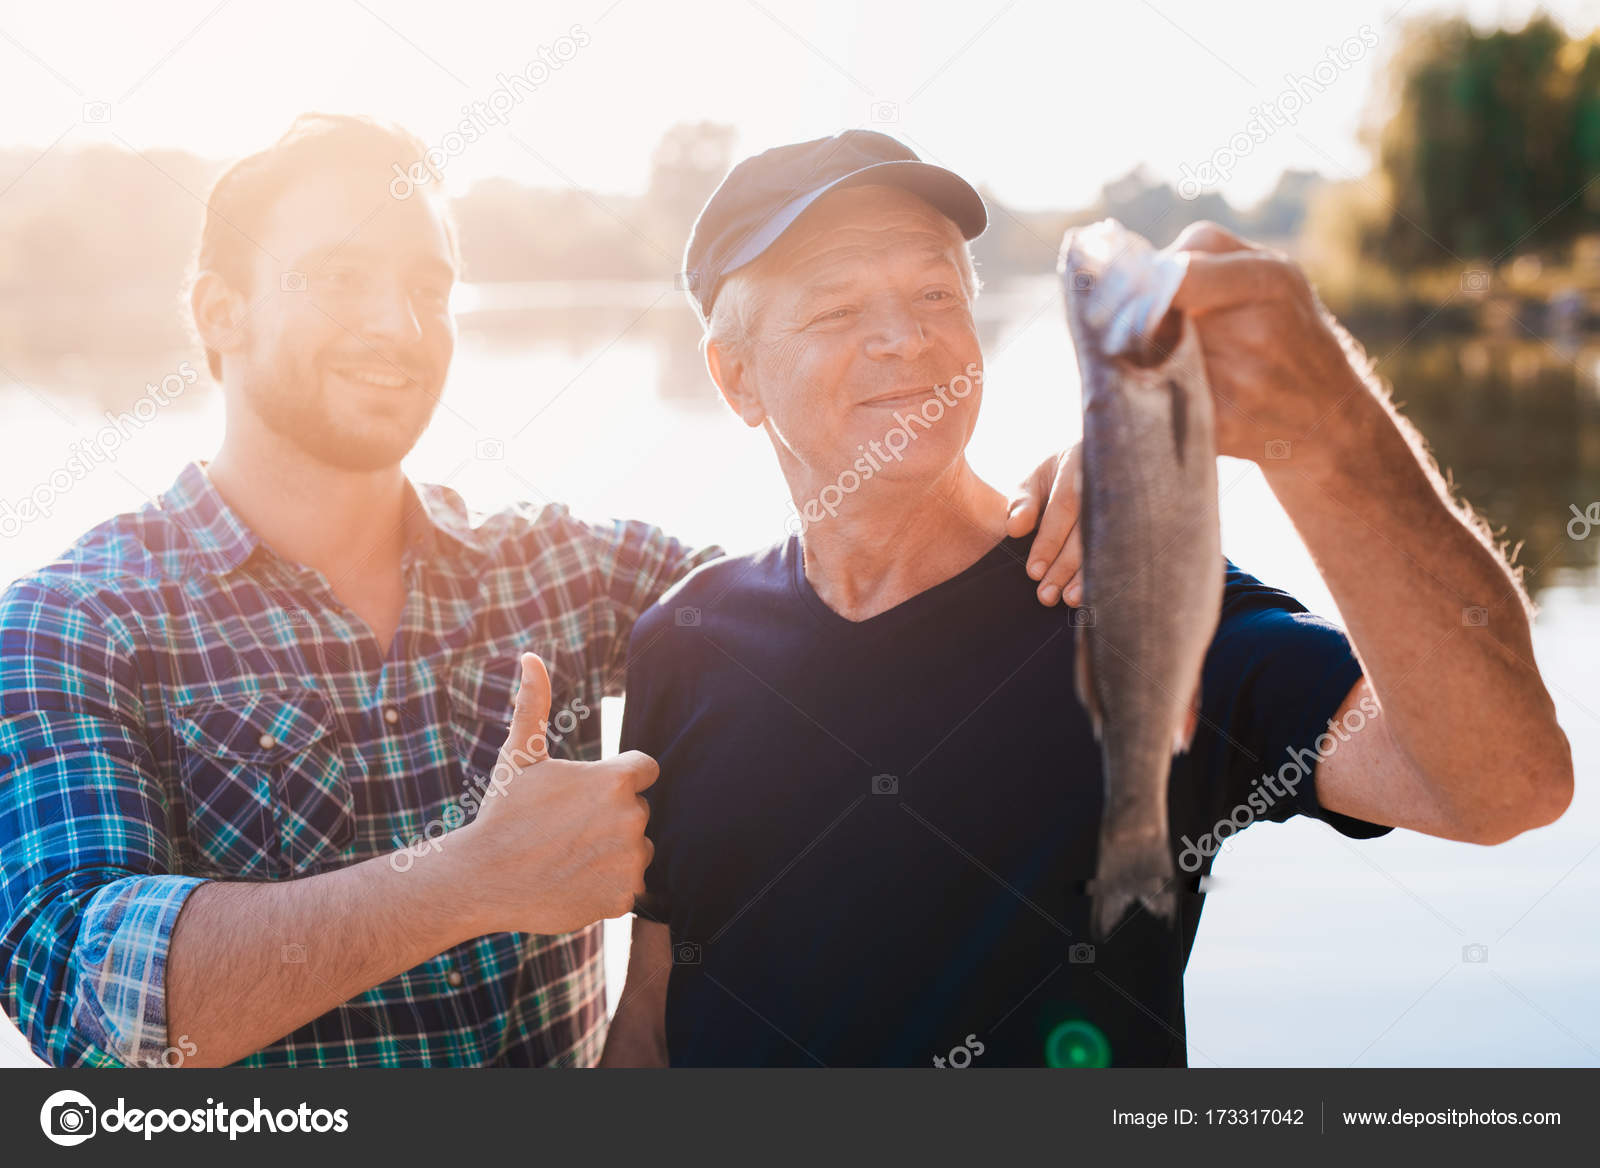 Thumbs up. The old man is holding a fish. A man stands behind him with his  thumb up — Stock Photo © vadimphoto1@gmail.com #173317042